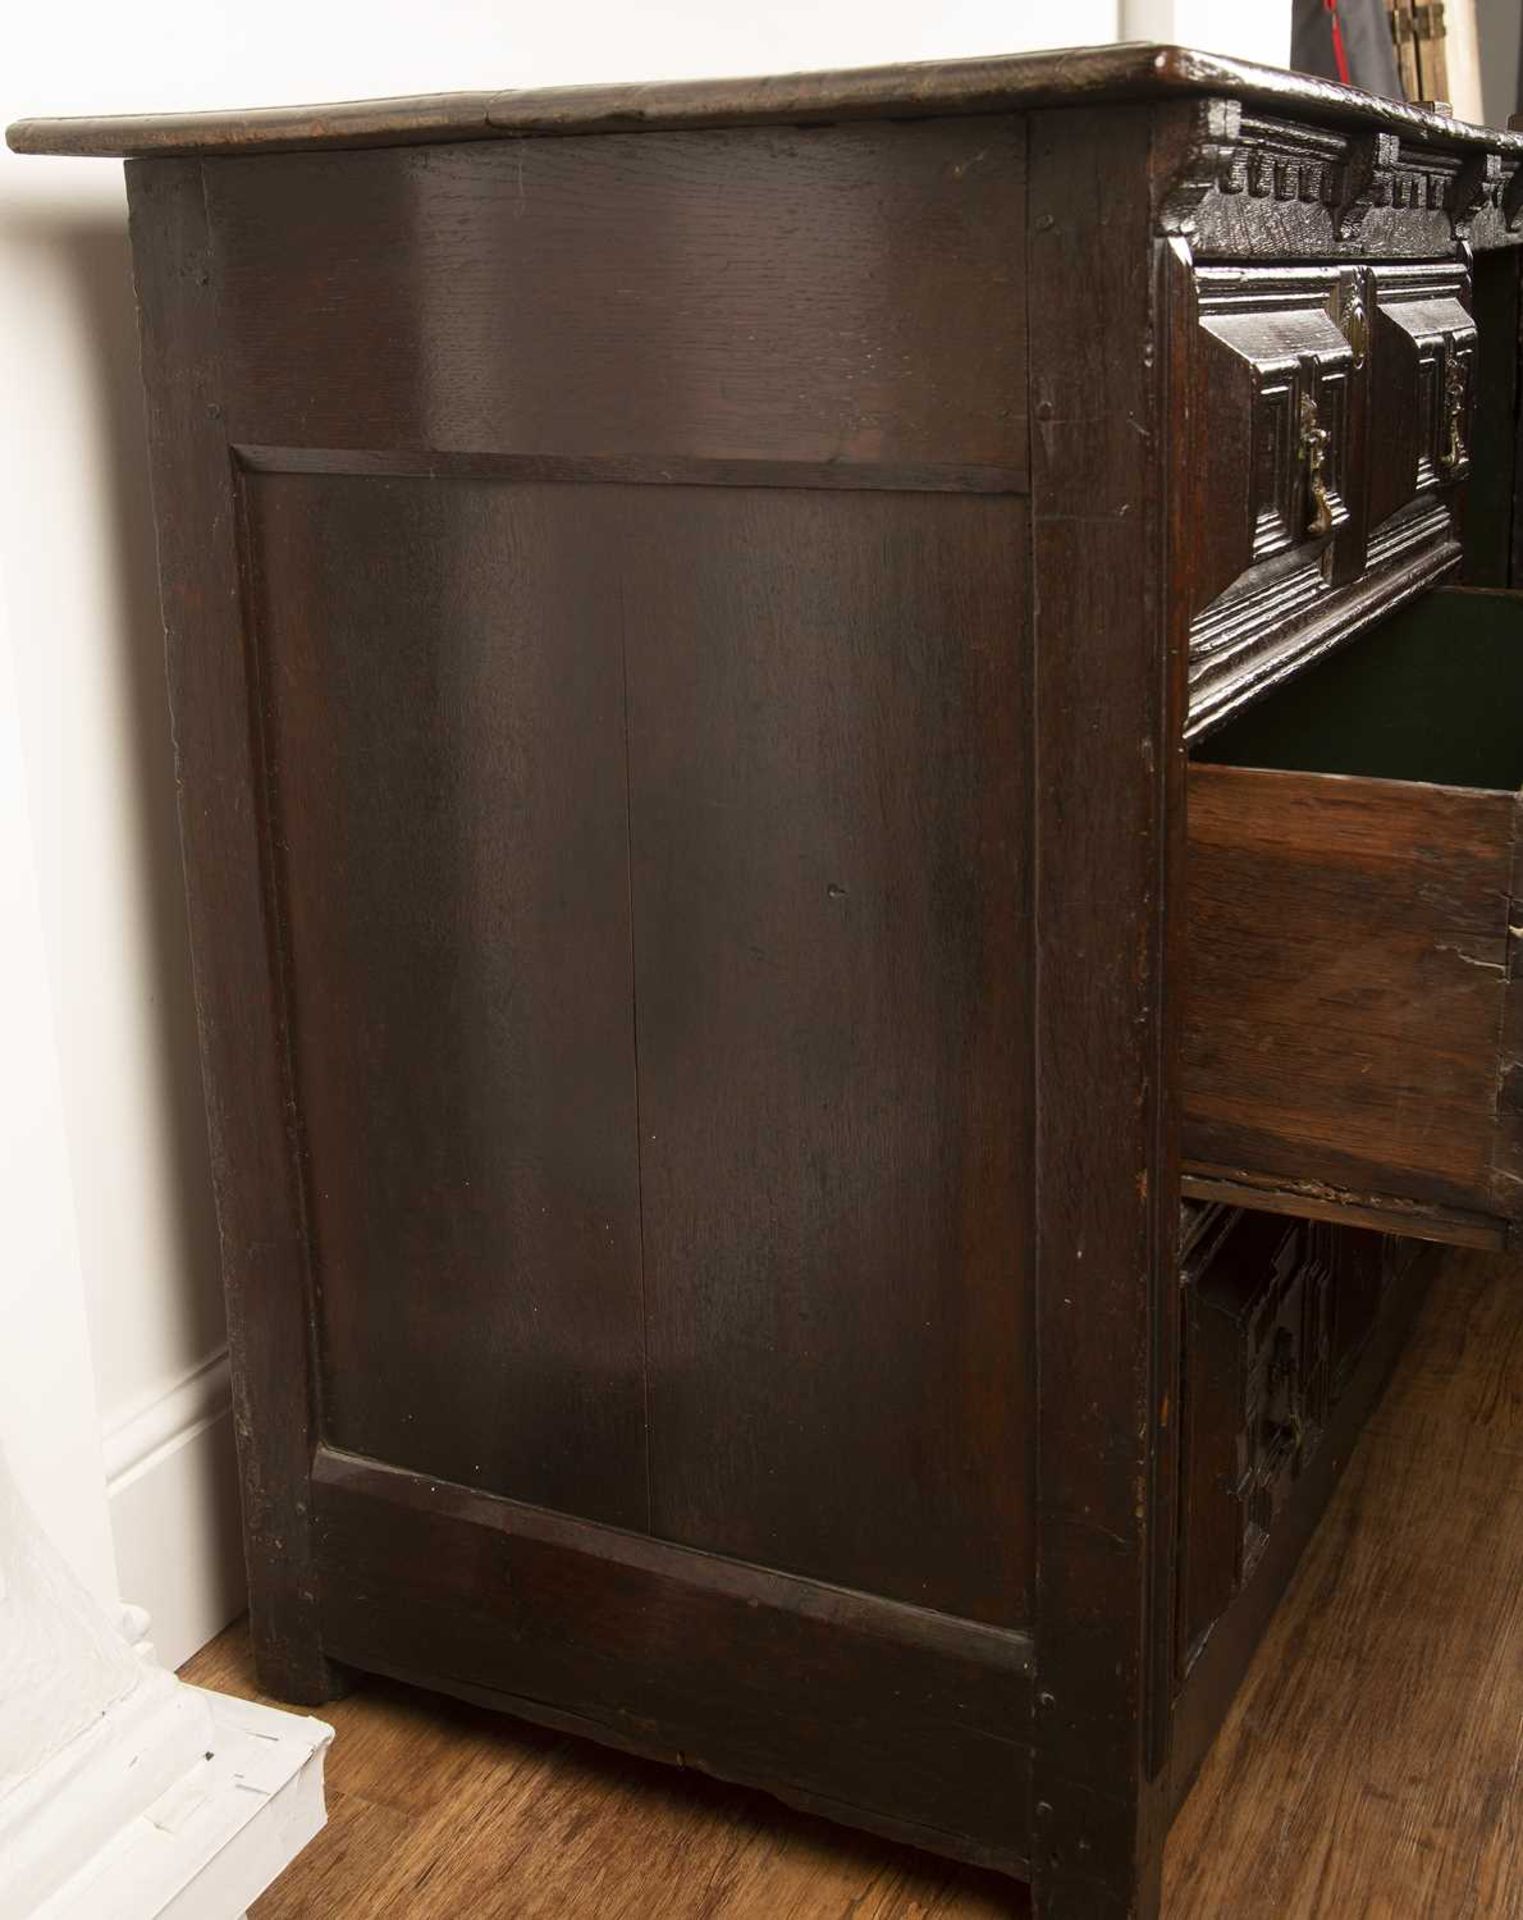 Moulded front dresser 17th/18th Century, fitted drawers and a central cupboard, with old brass - Image 4 of 5